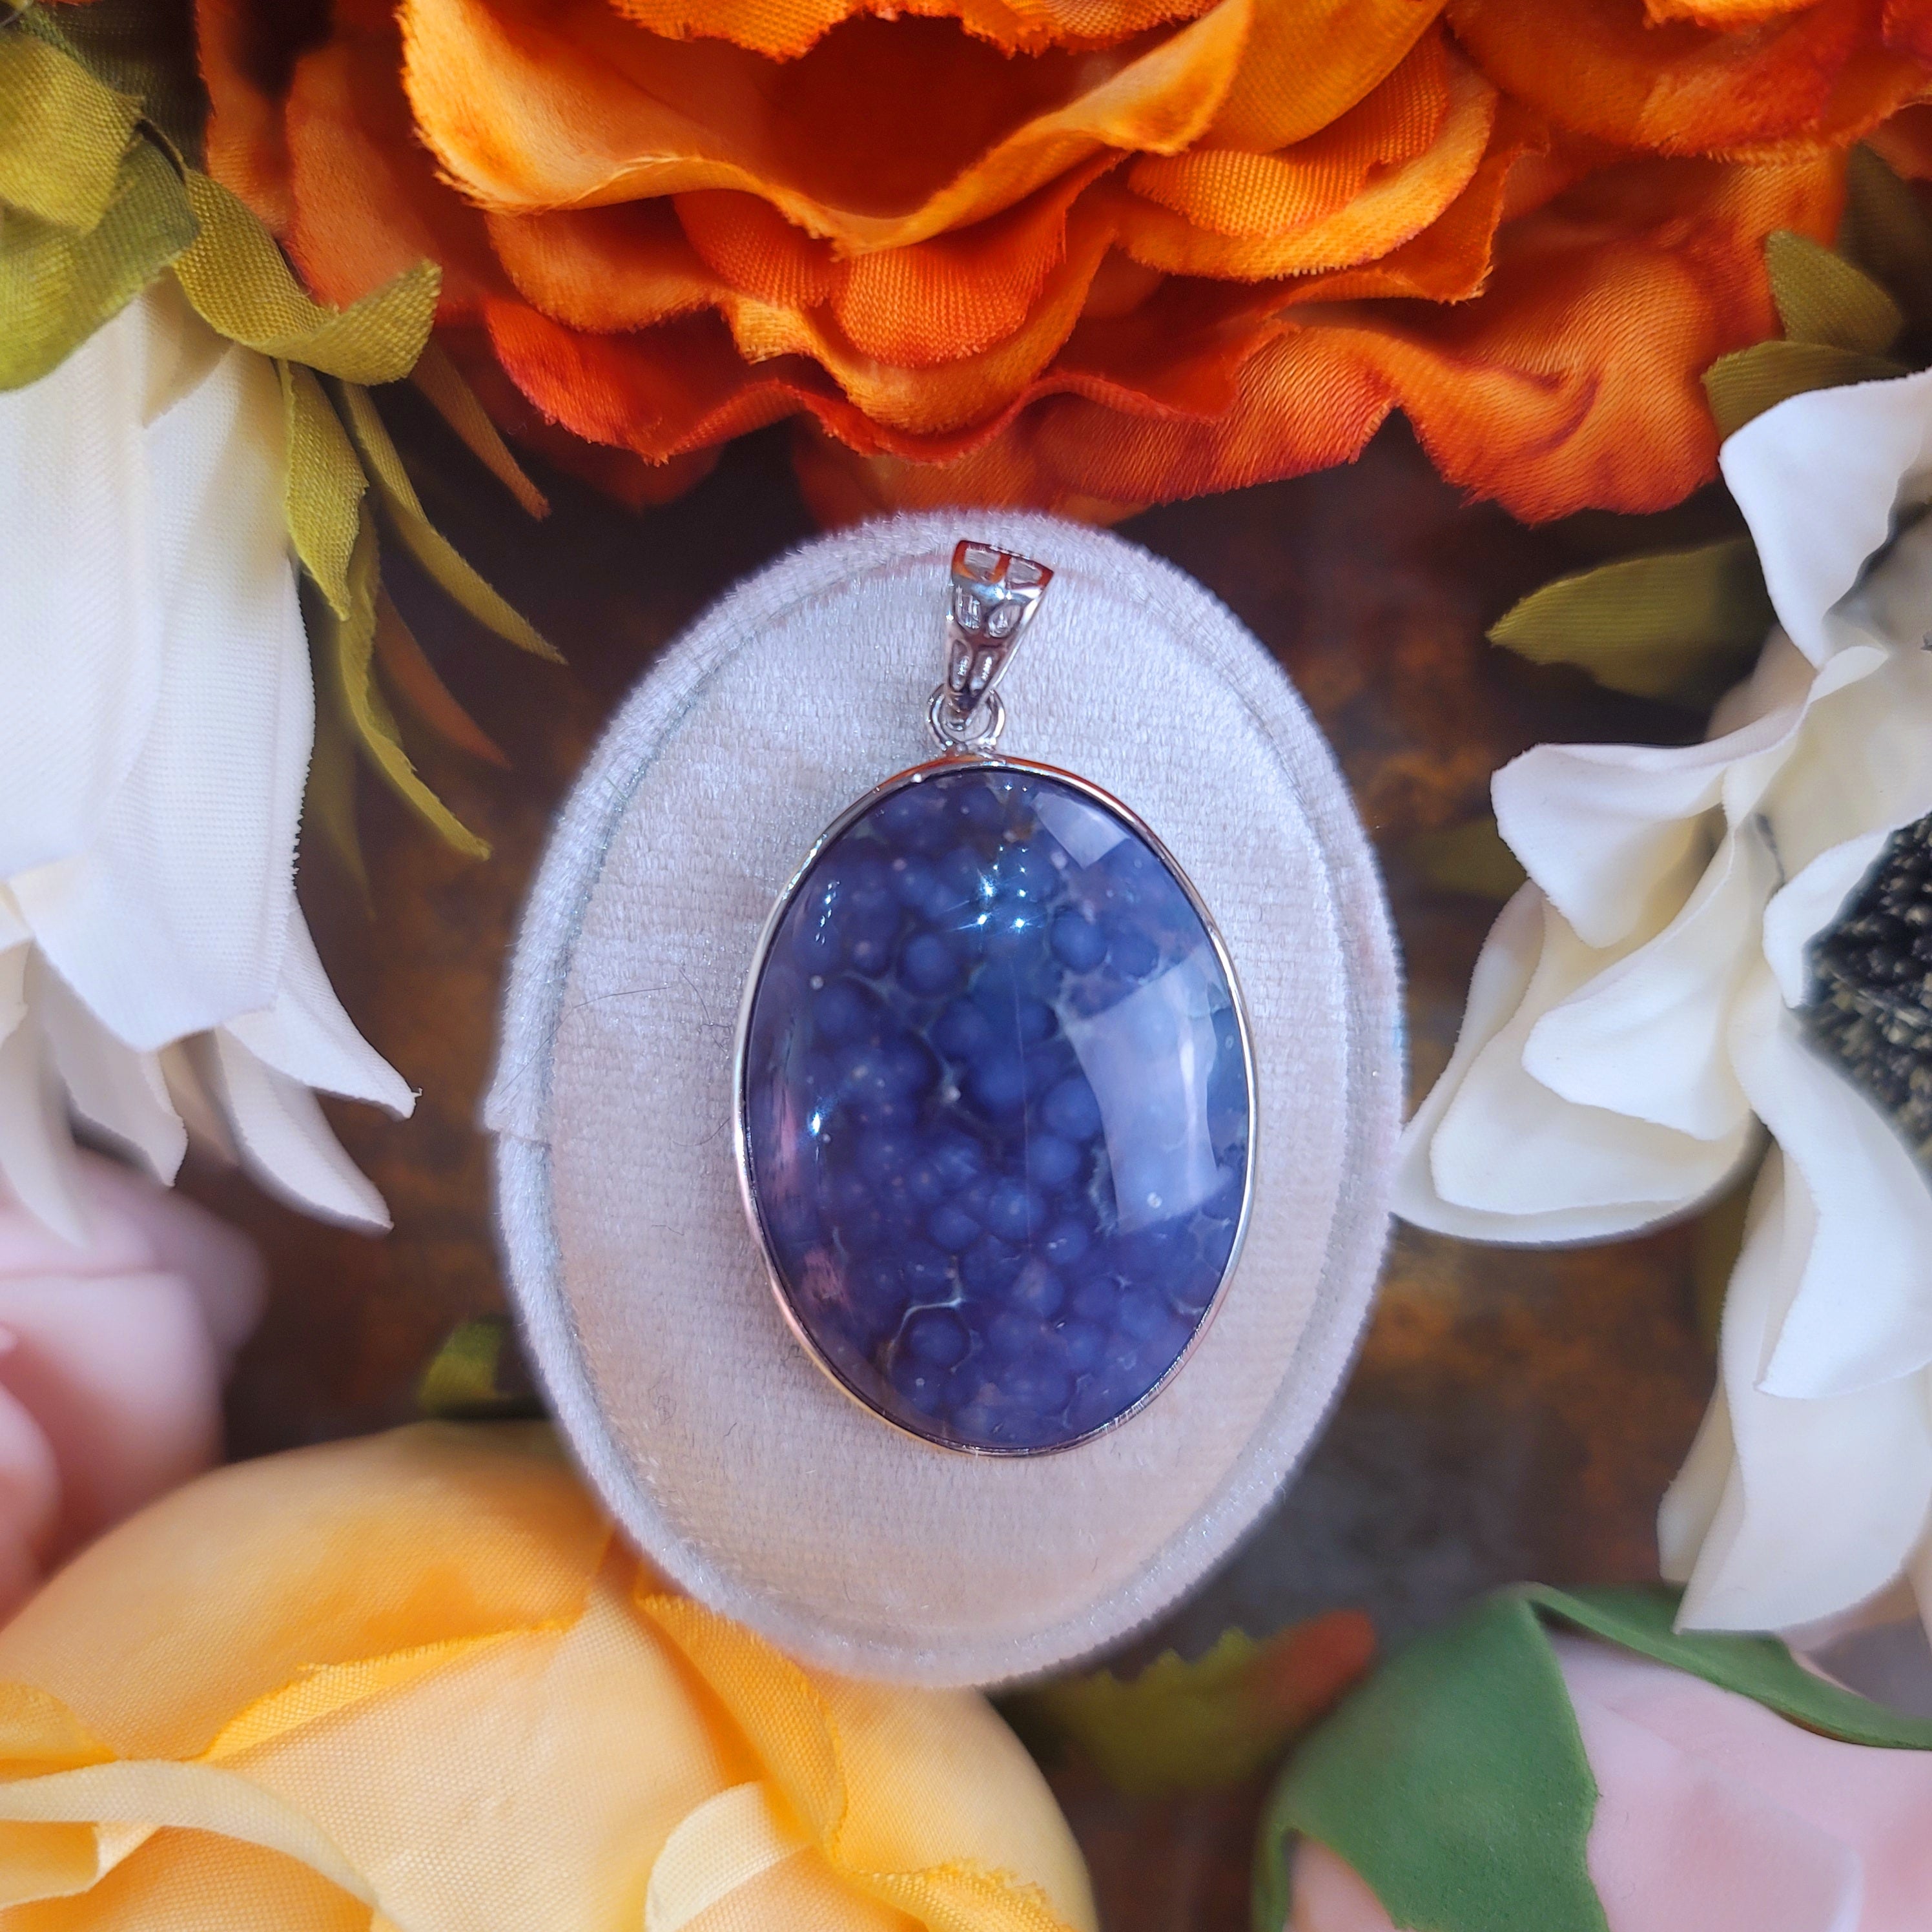 Grape Agate Pendant for Attracting your Soul Mate & Connecting with your Higher Self